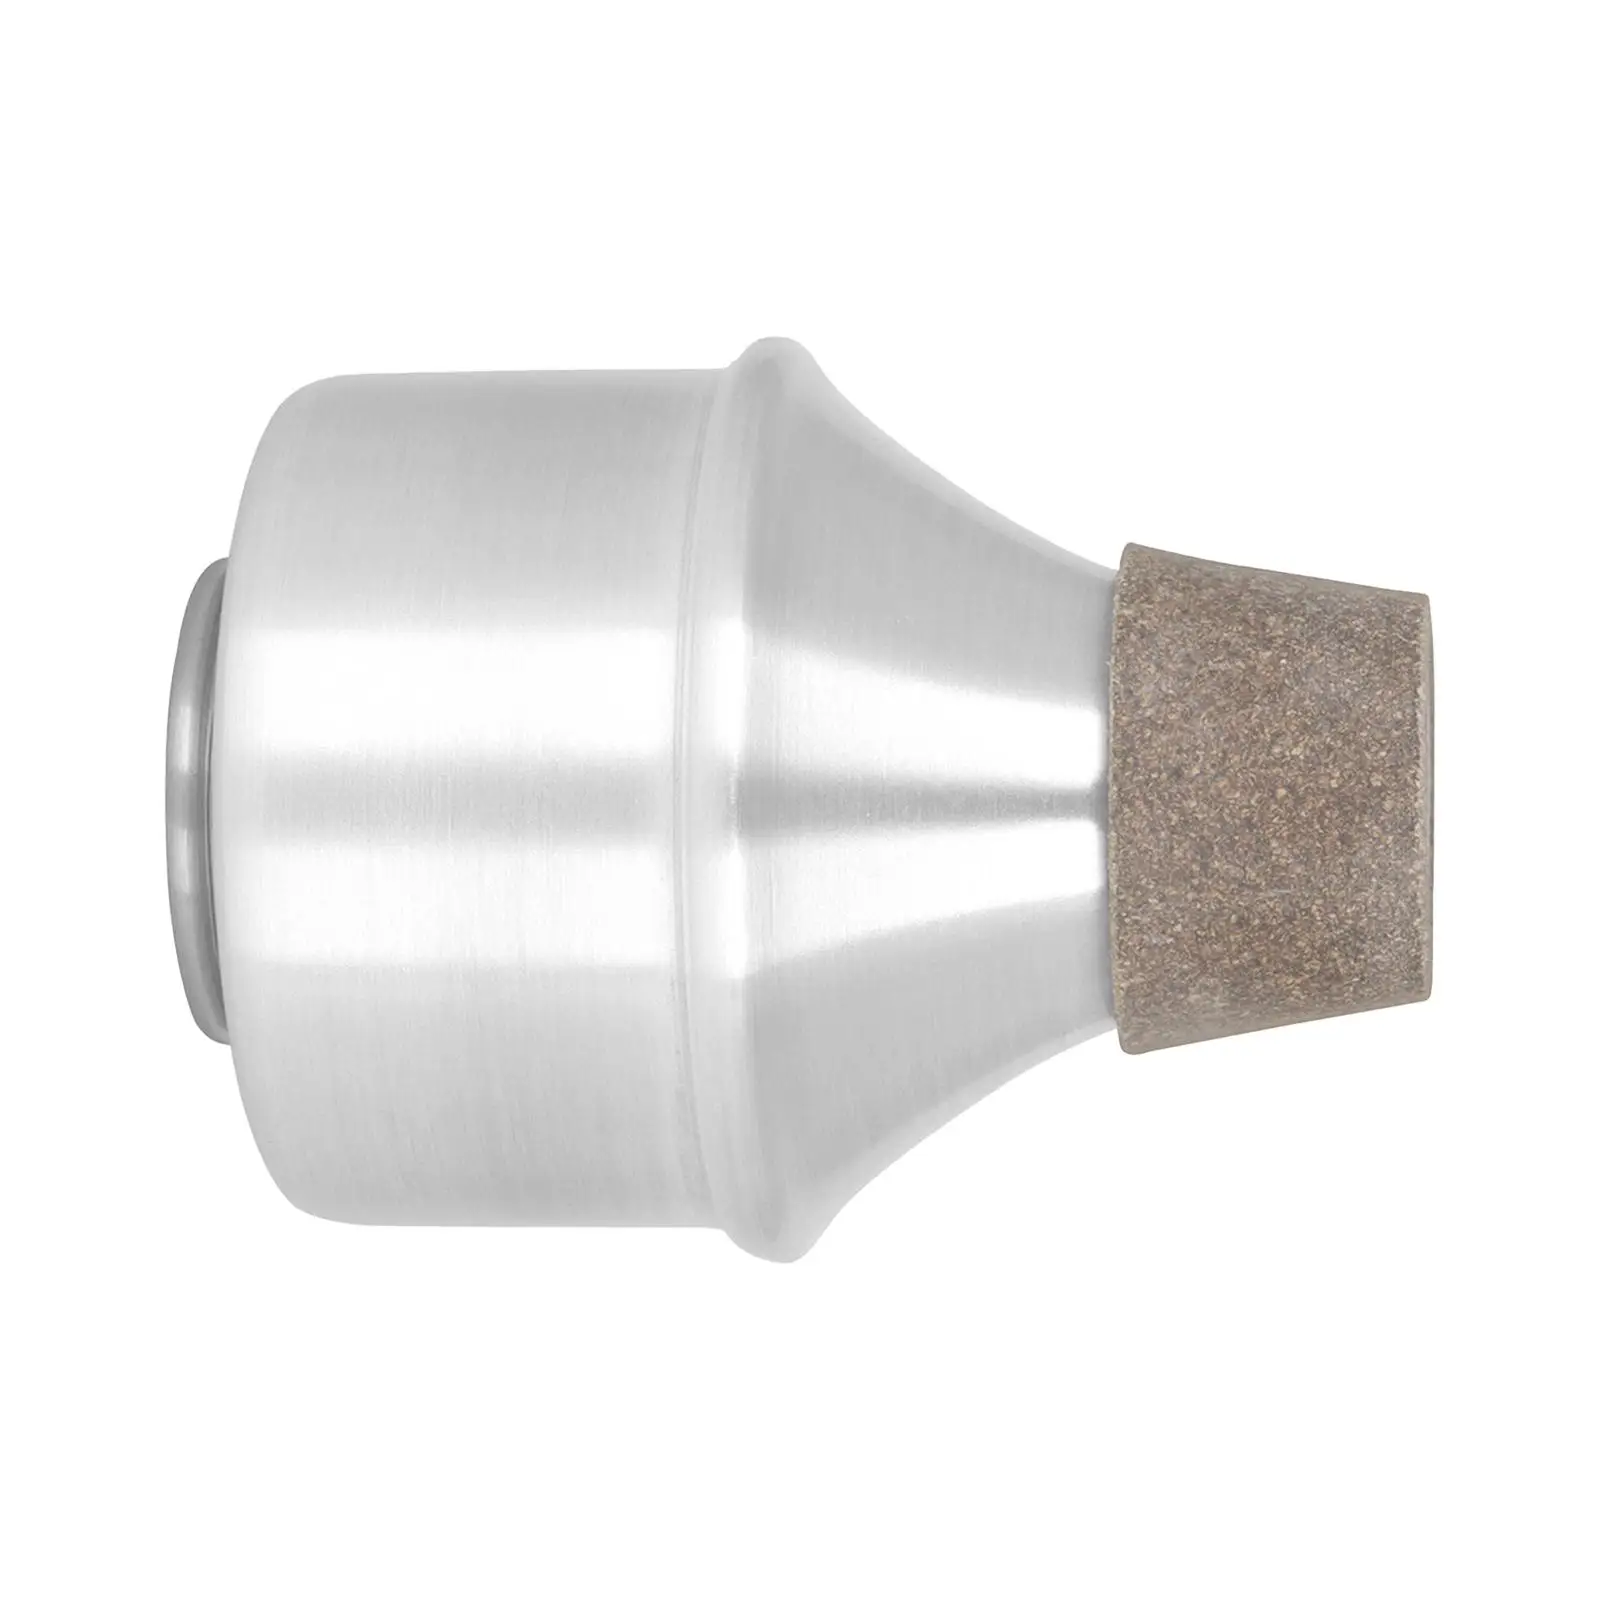 Wah Mute for Trumpet Trumpet Straight Mute Aluminum Practice Trumpet Mute for